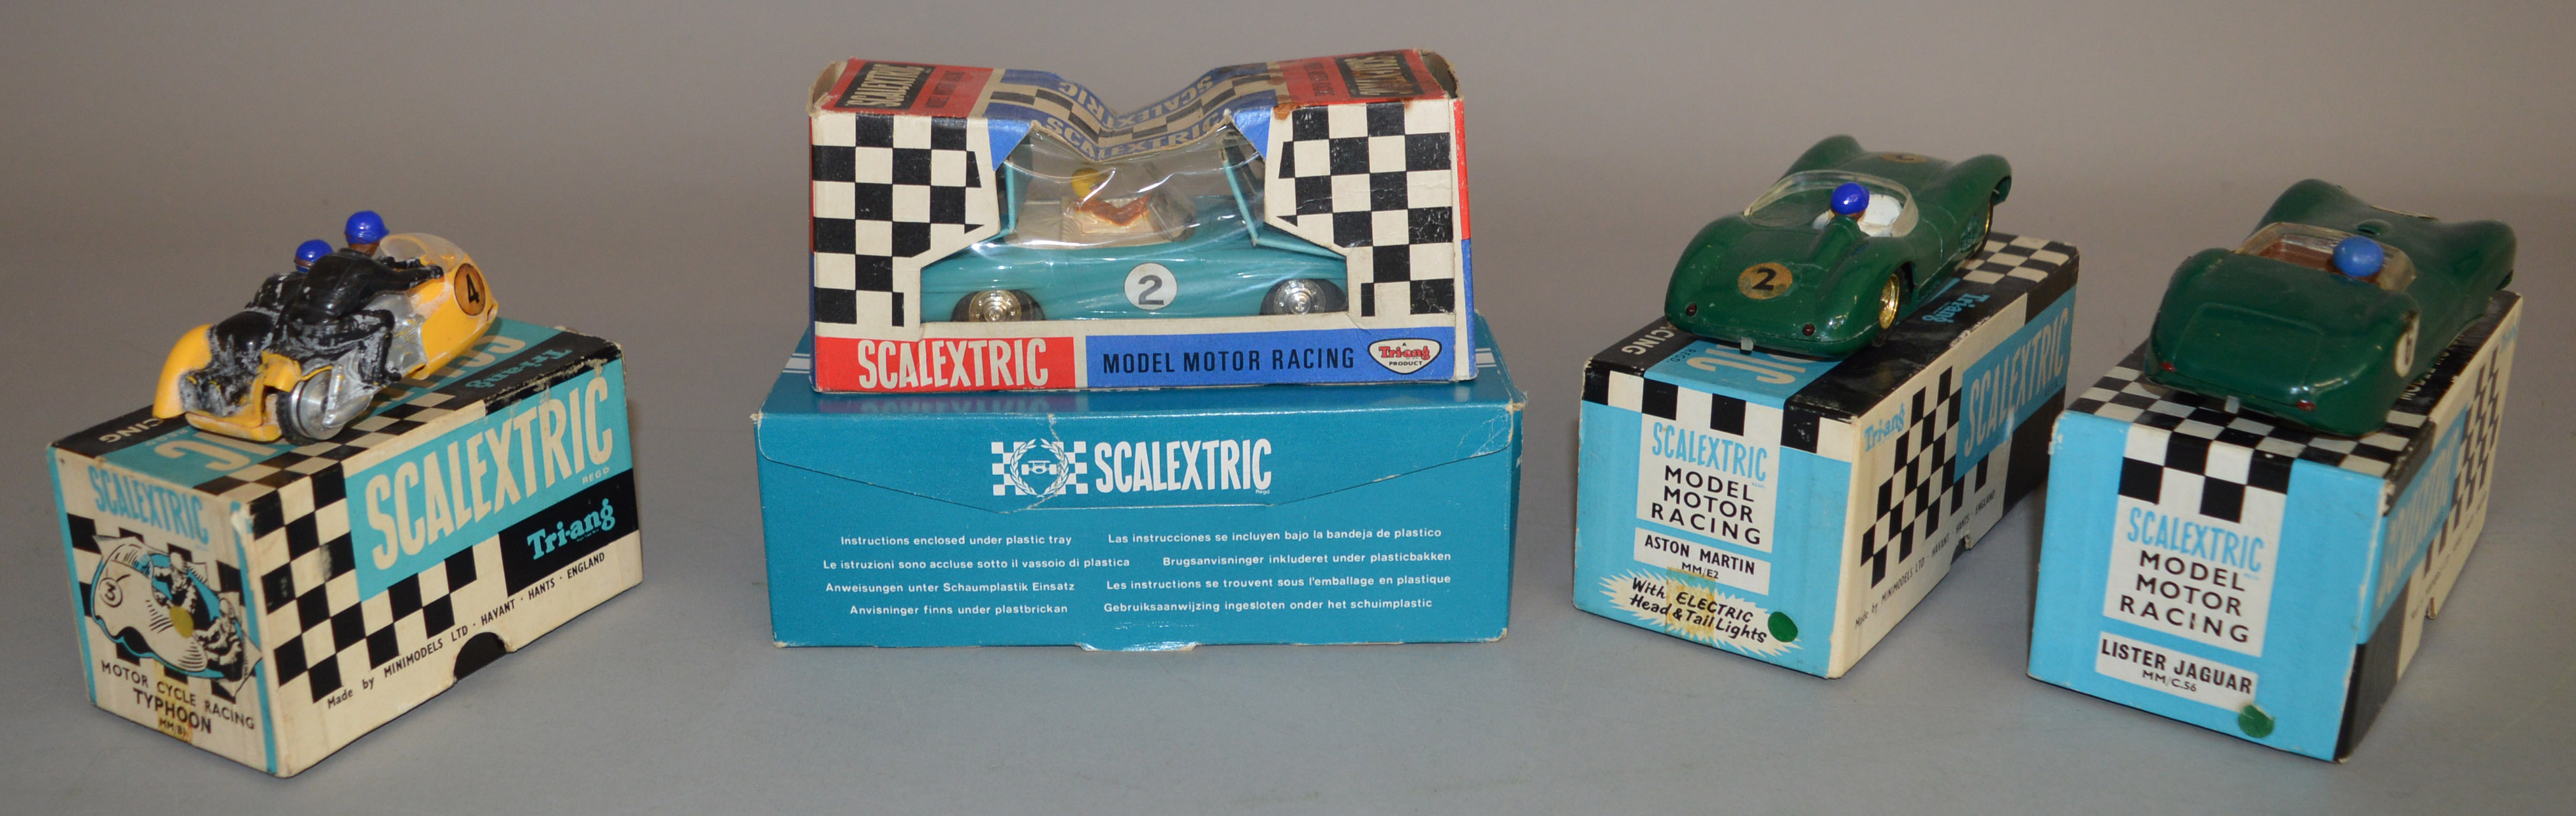 5x Boxed Scalextric models including Lister Jaguar, and Aston martin. - Image 2 of 2